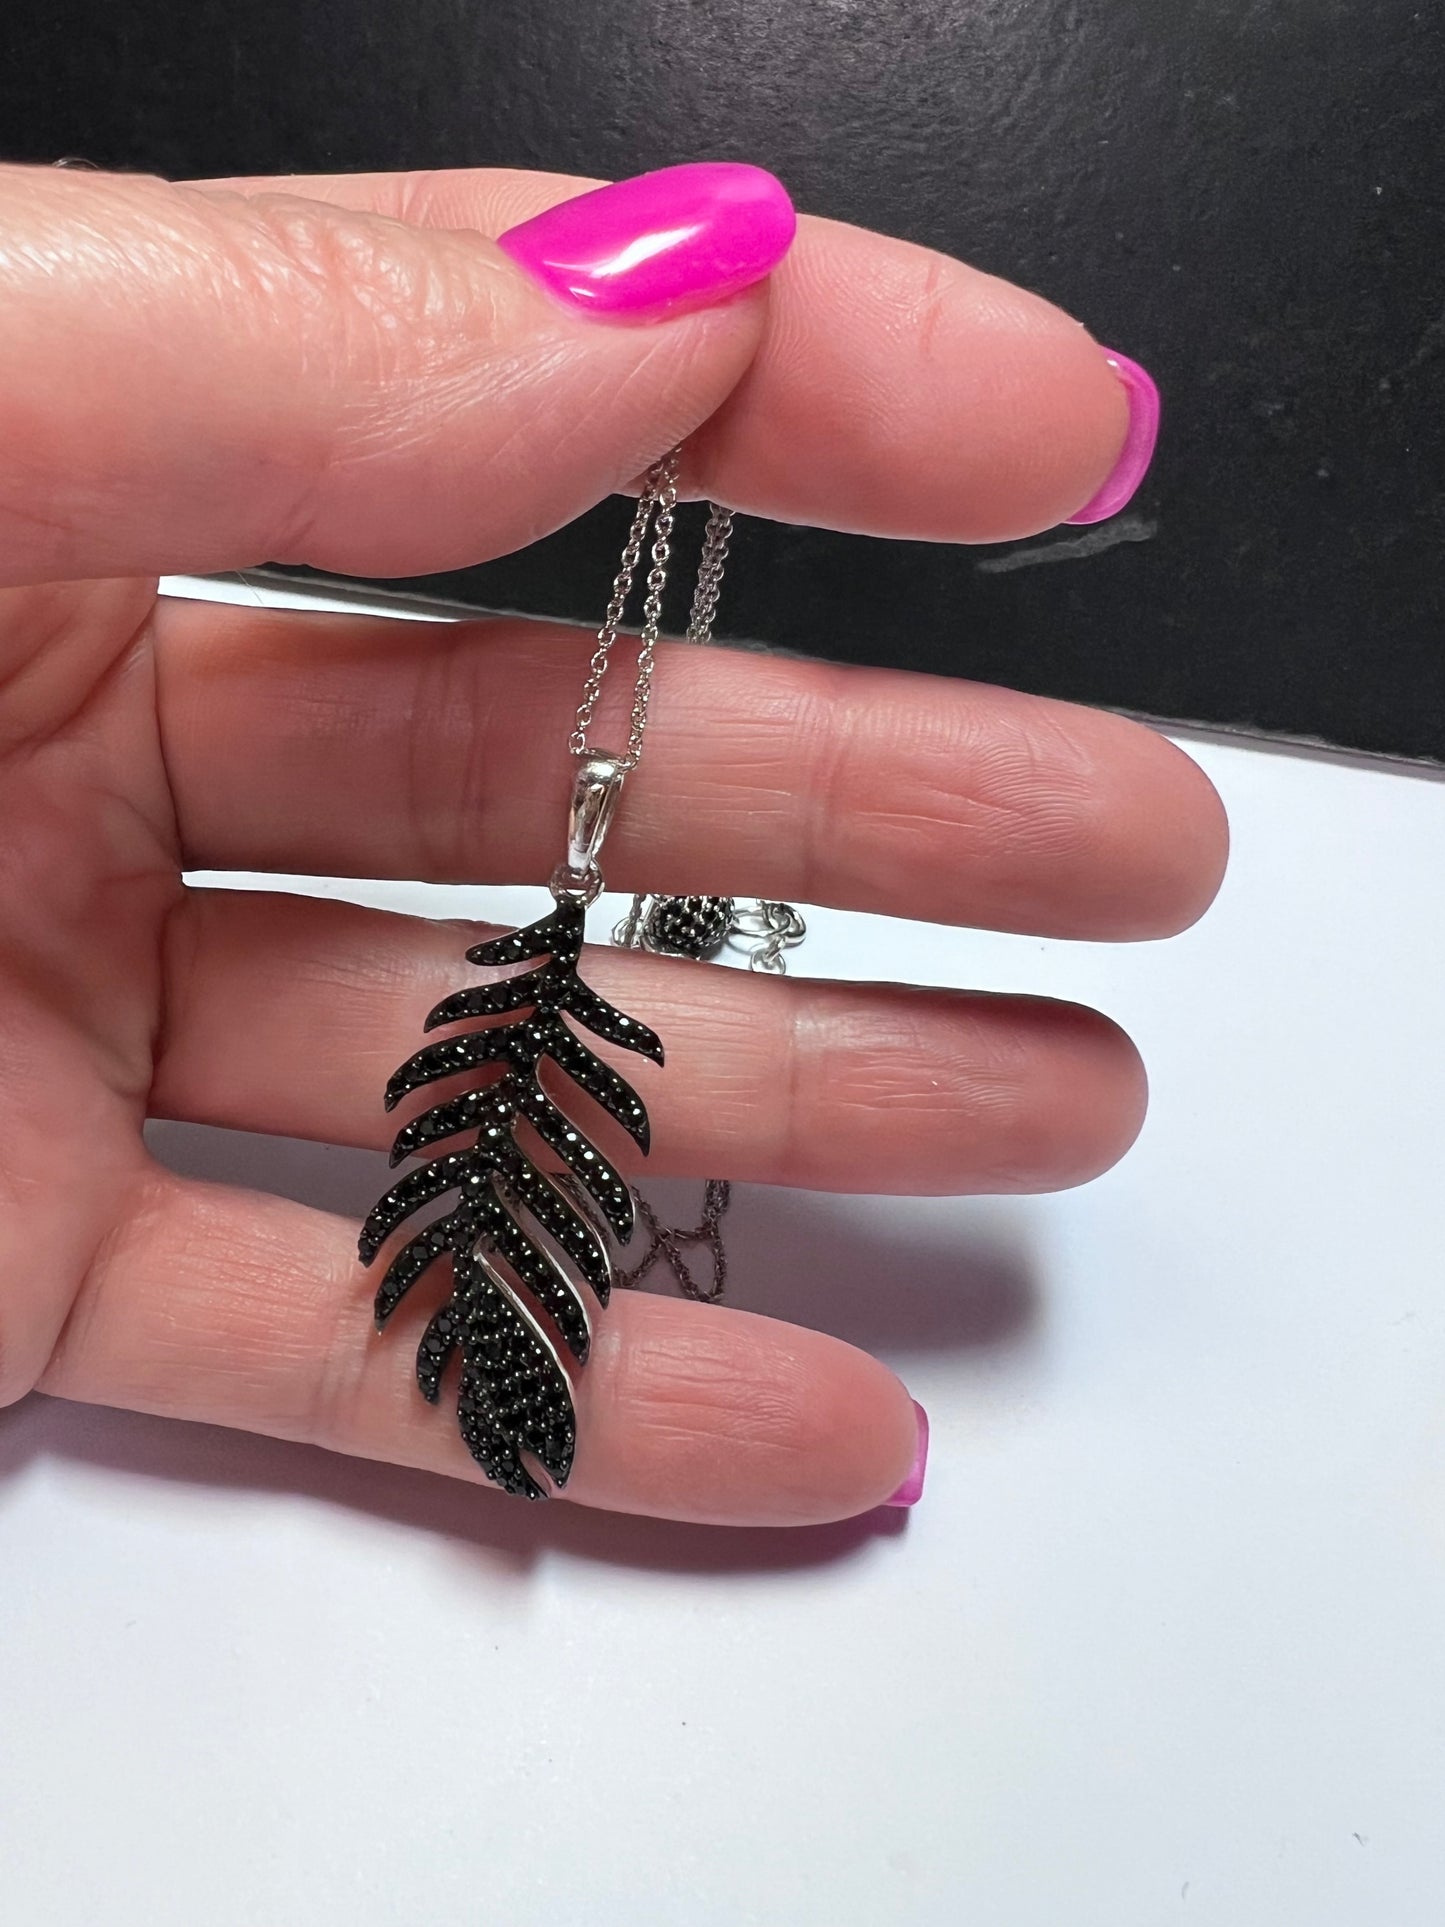 1.69ctw Round Black Spinel Sterling Silver Feather Pendant With 18 inch Chain .